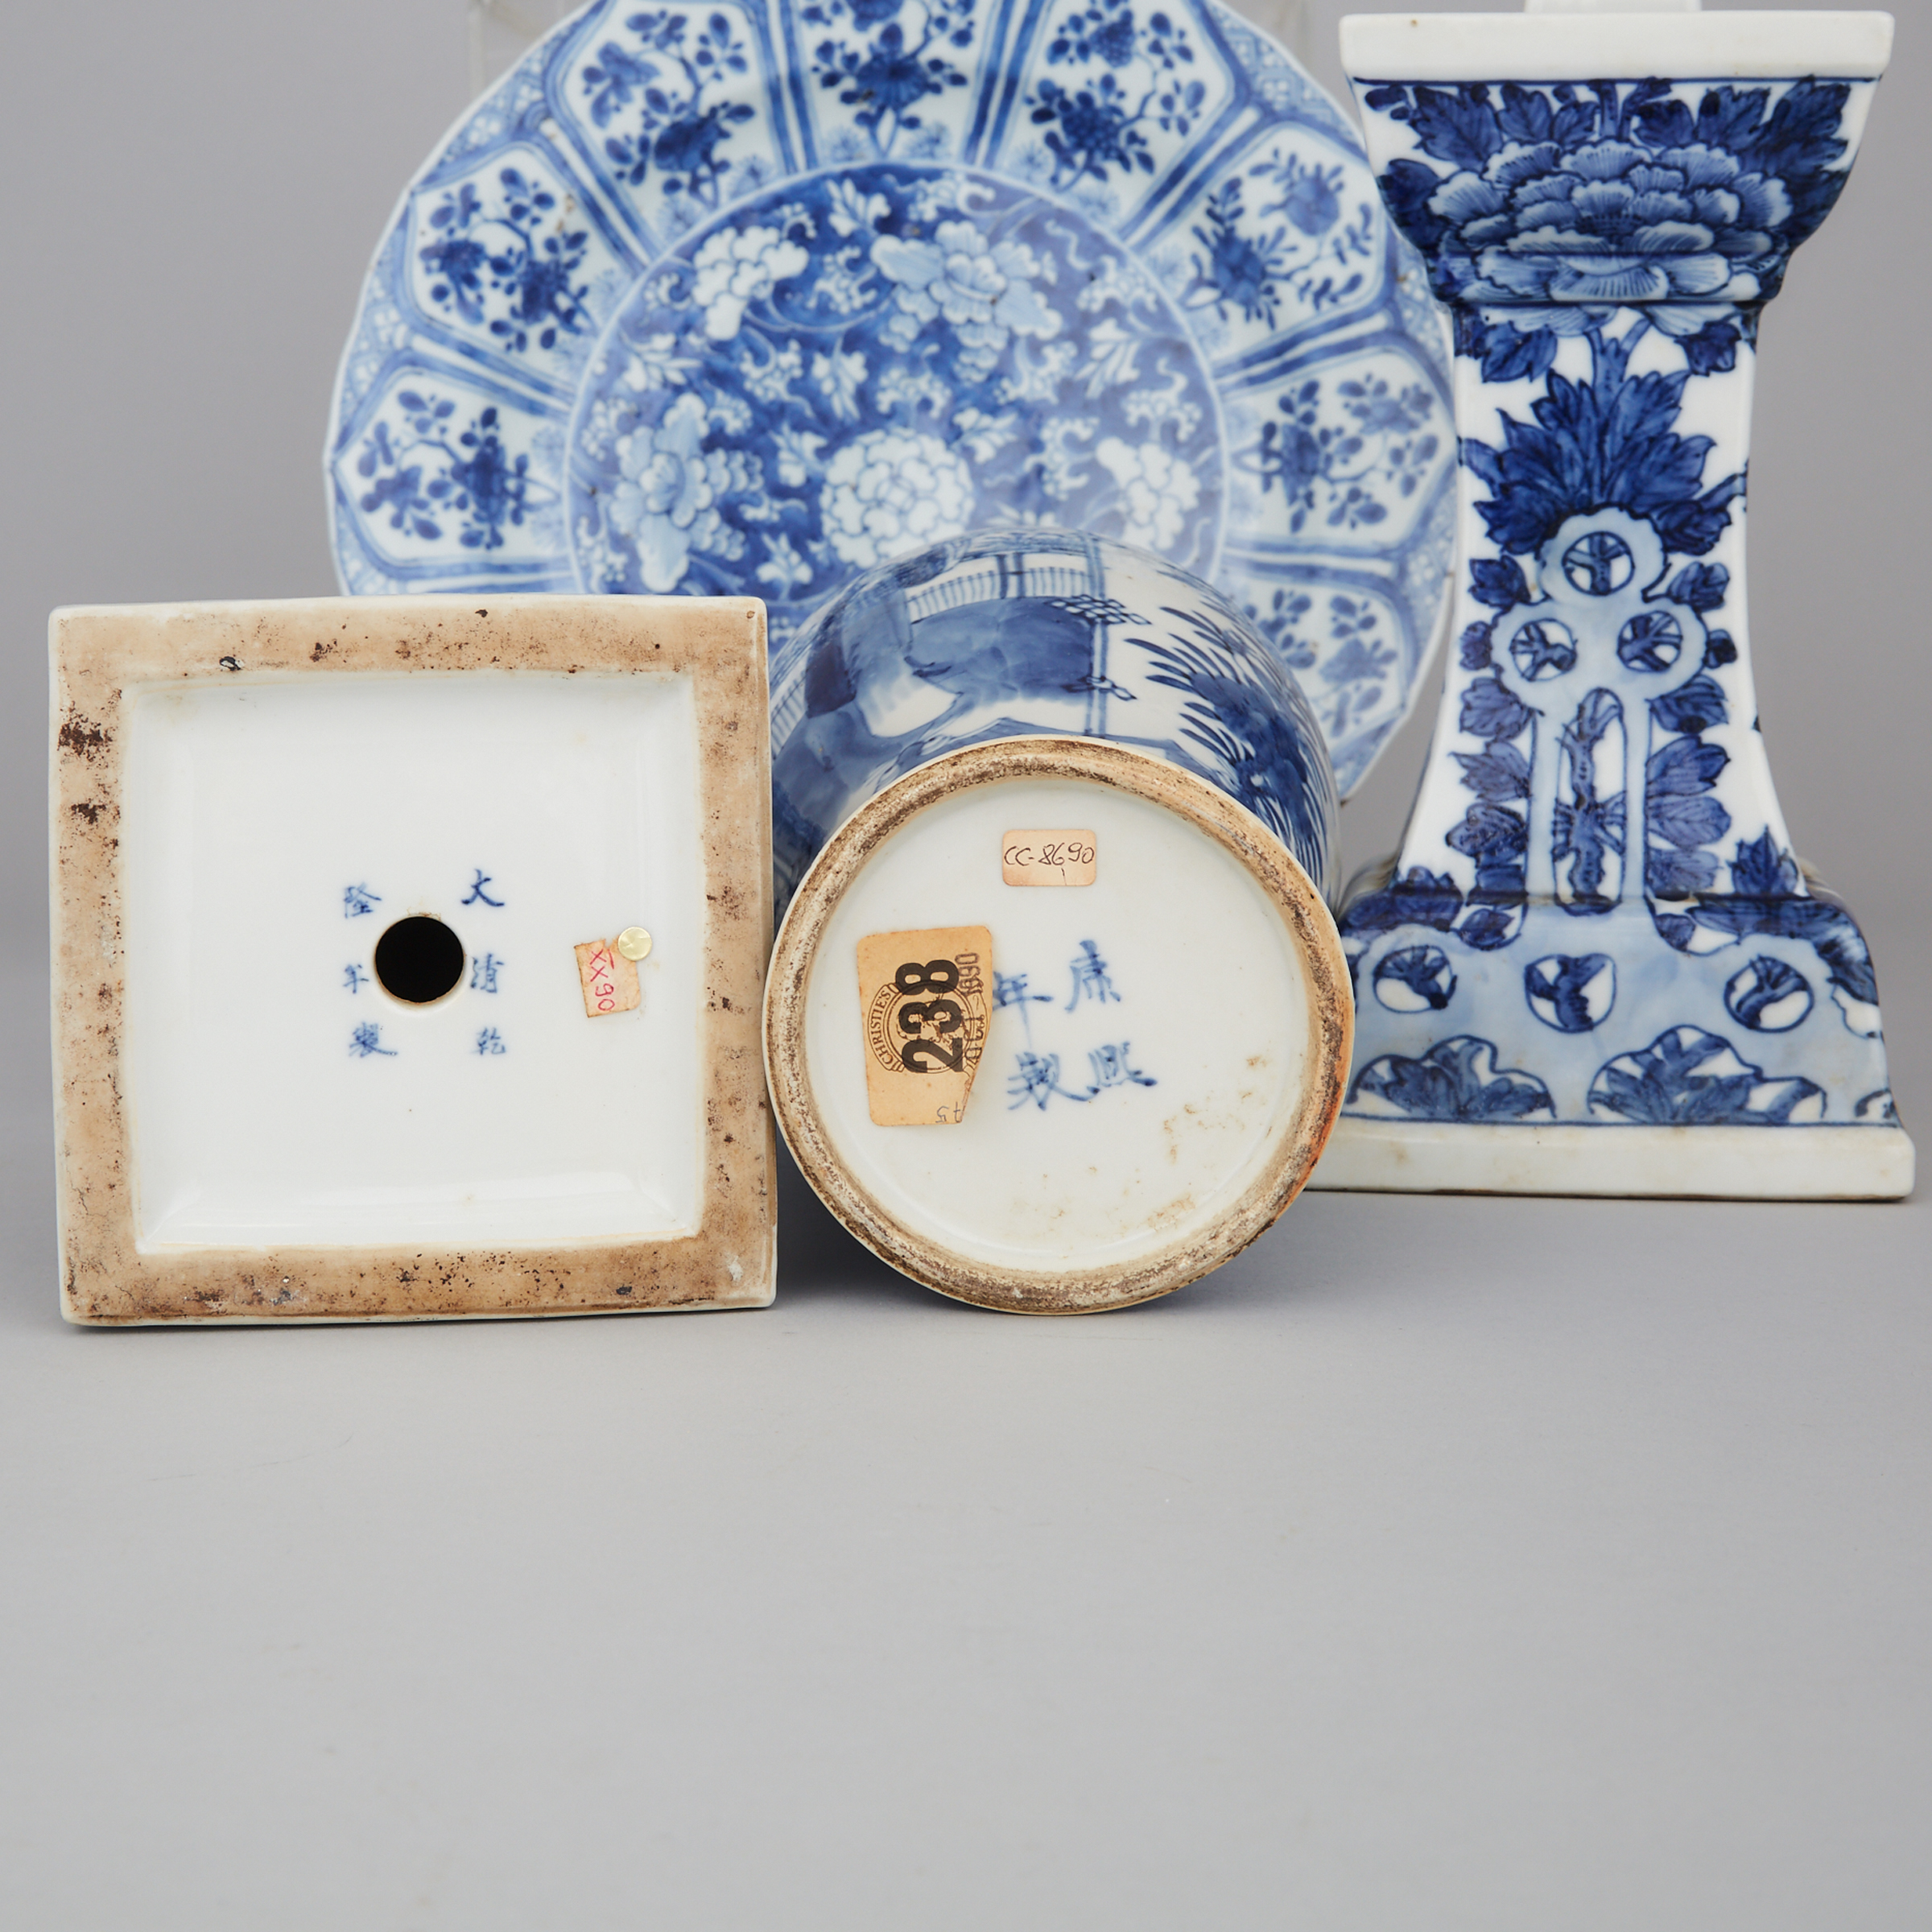 A Group of Four Export Blue and White Porcelain, Kangxi Period and Later